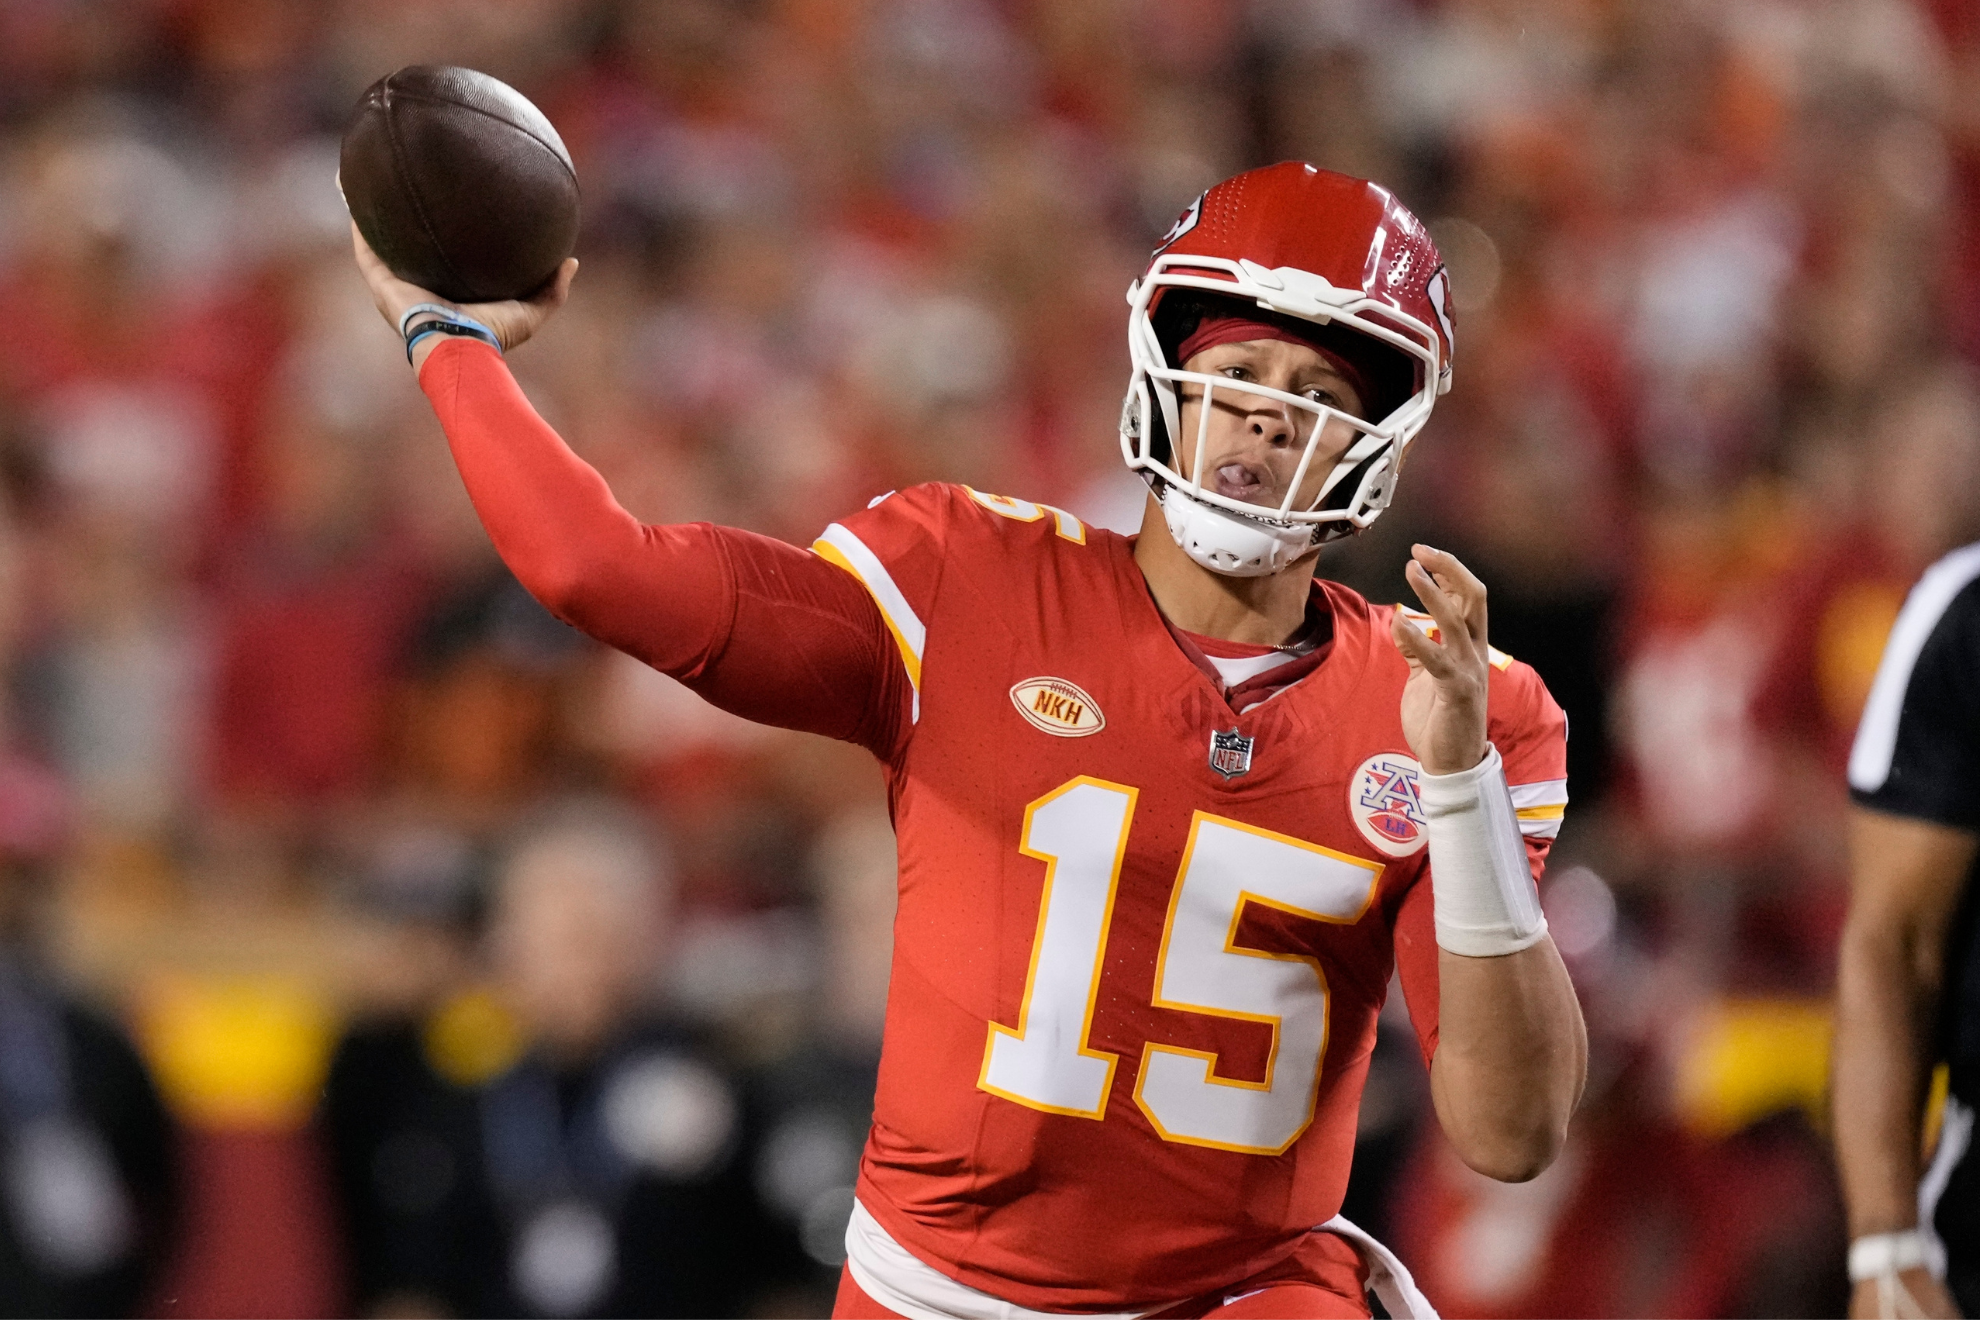 Mahomes is now 12-0 against the Broncos.